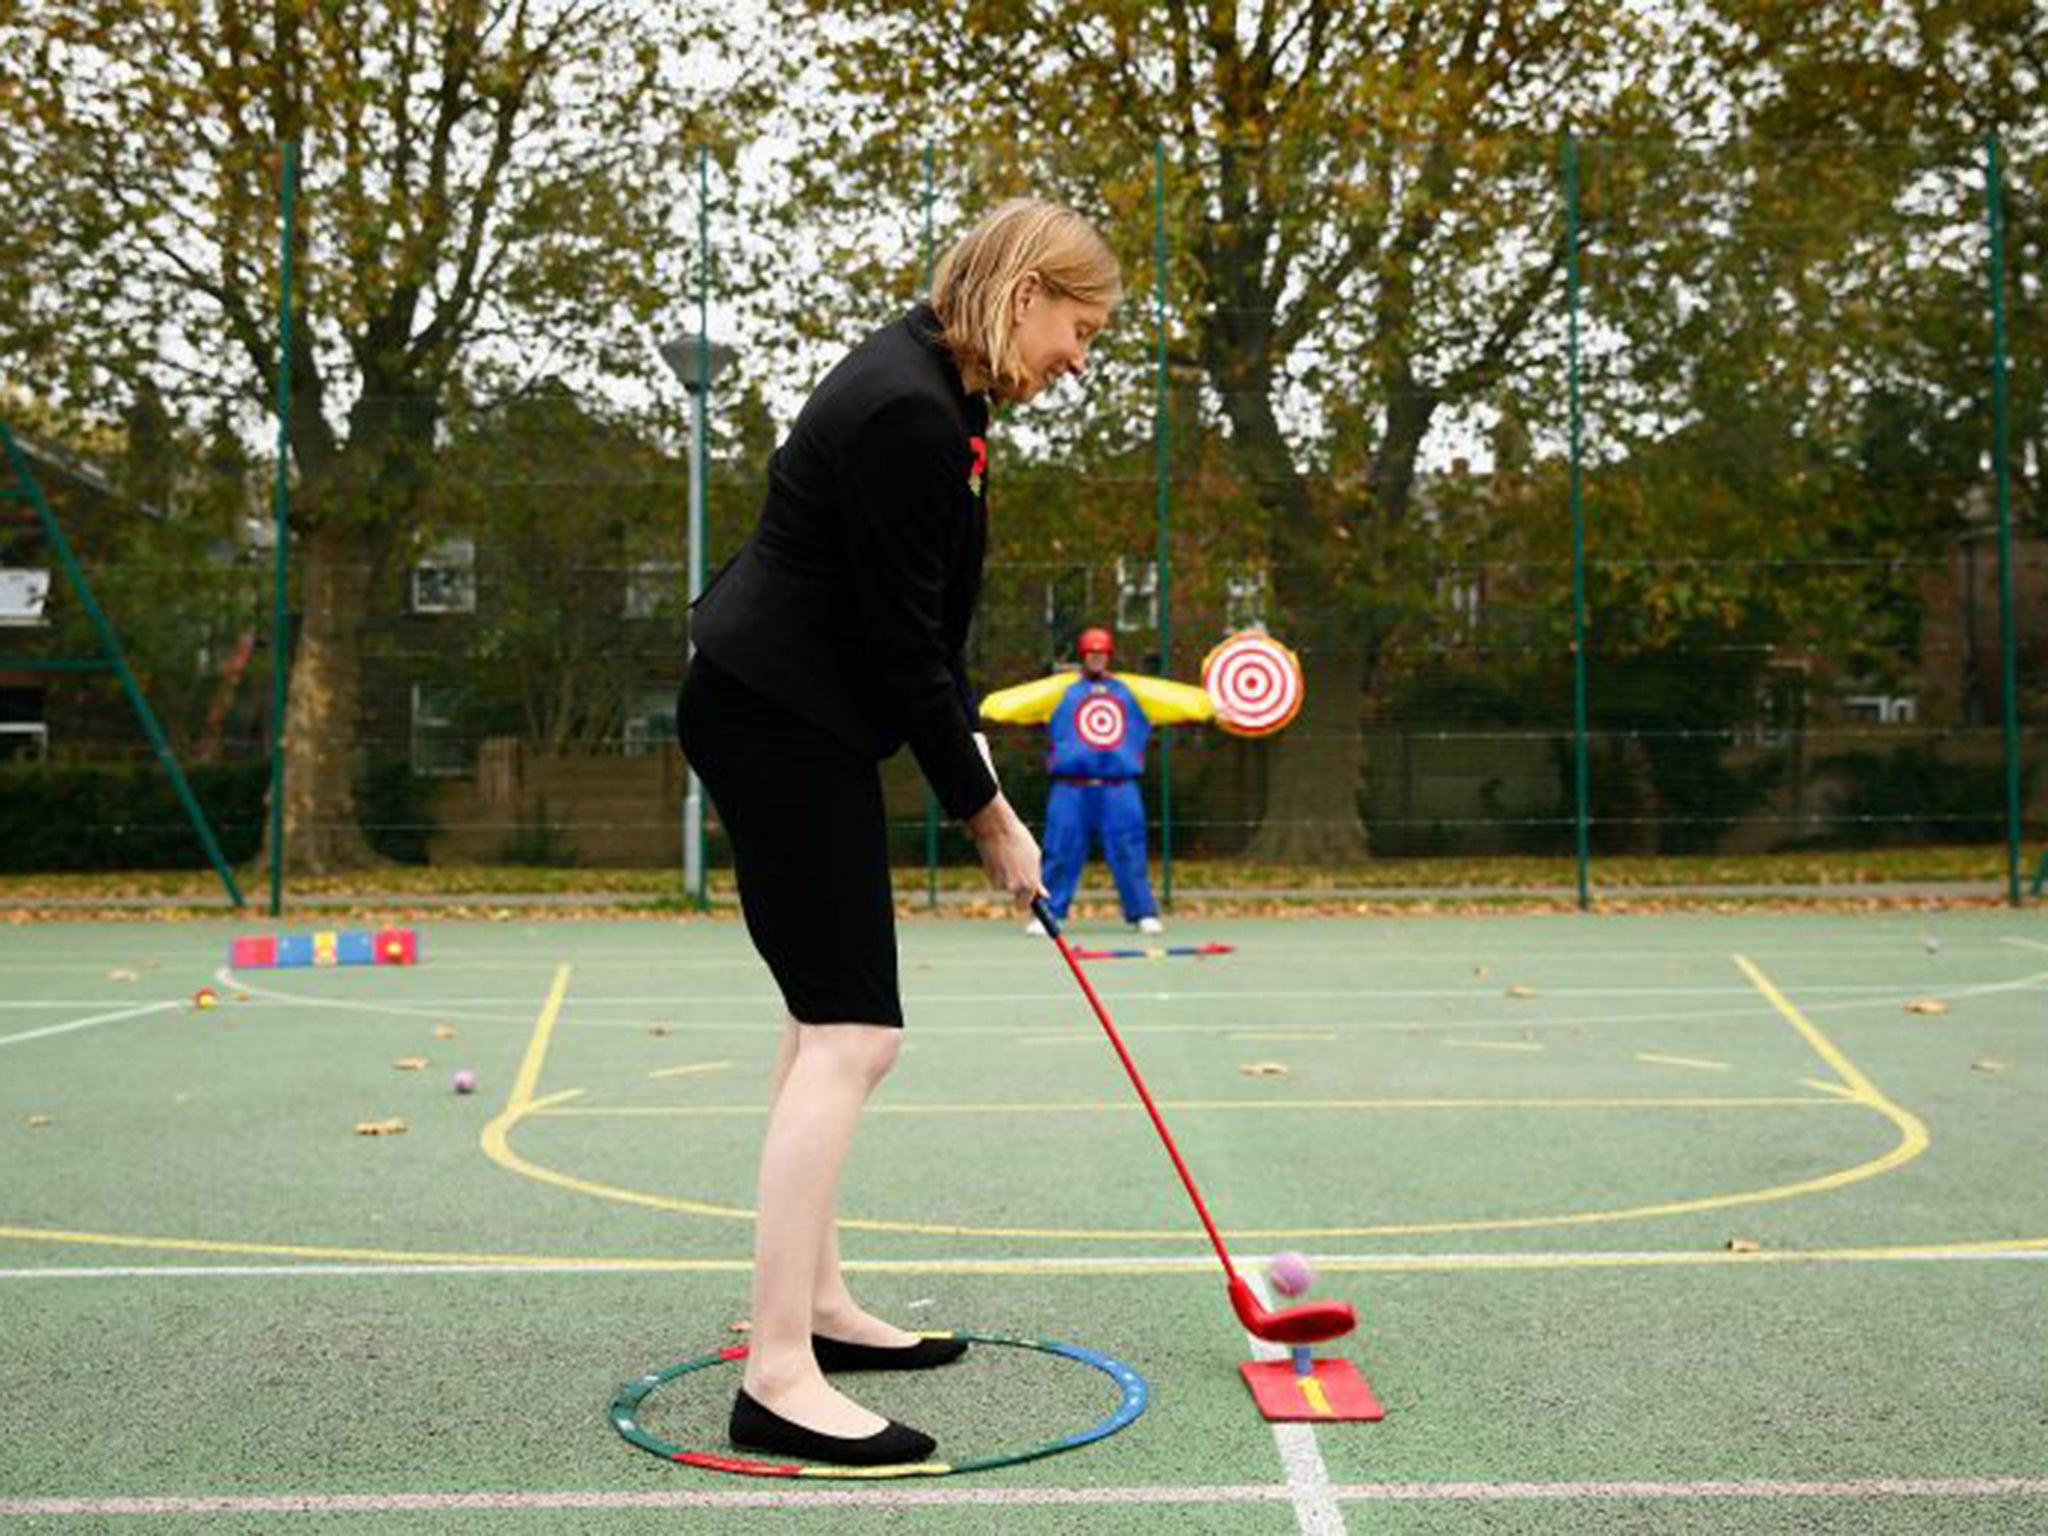 The Minister of Sport, Tracey Crouch takes part in Snag Golf as she unveil new funding for some of London's most disadvantaged communities